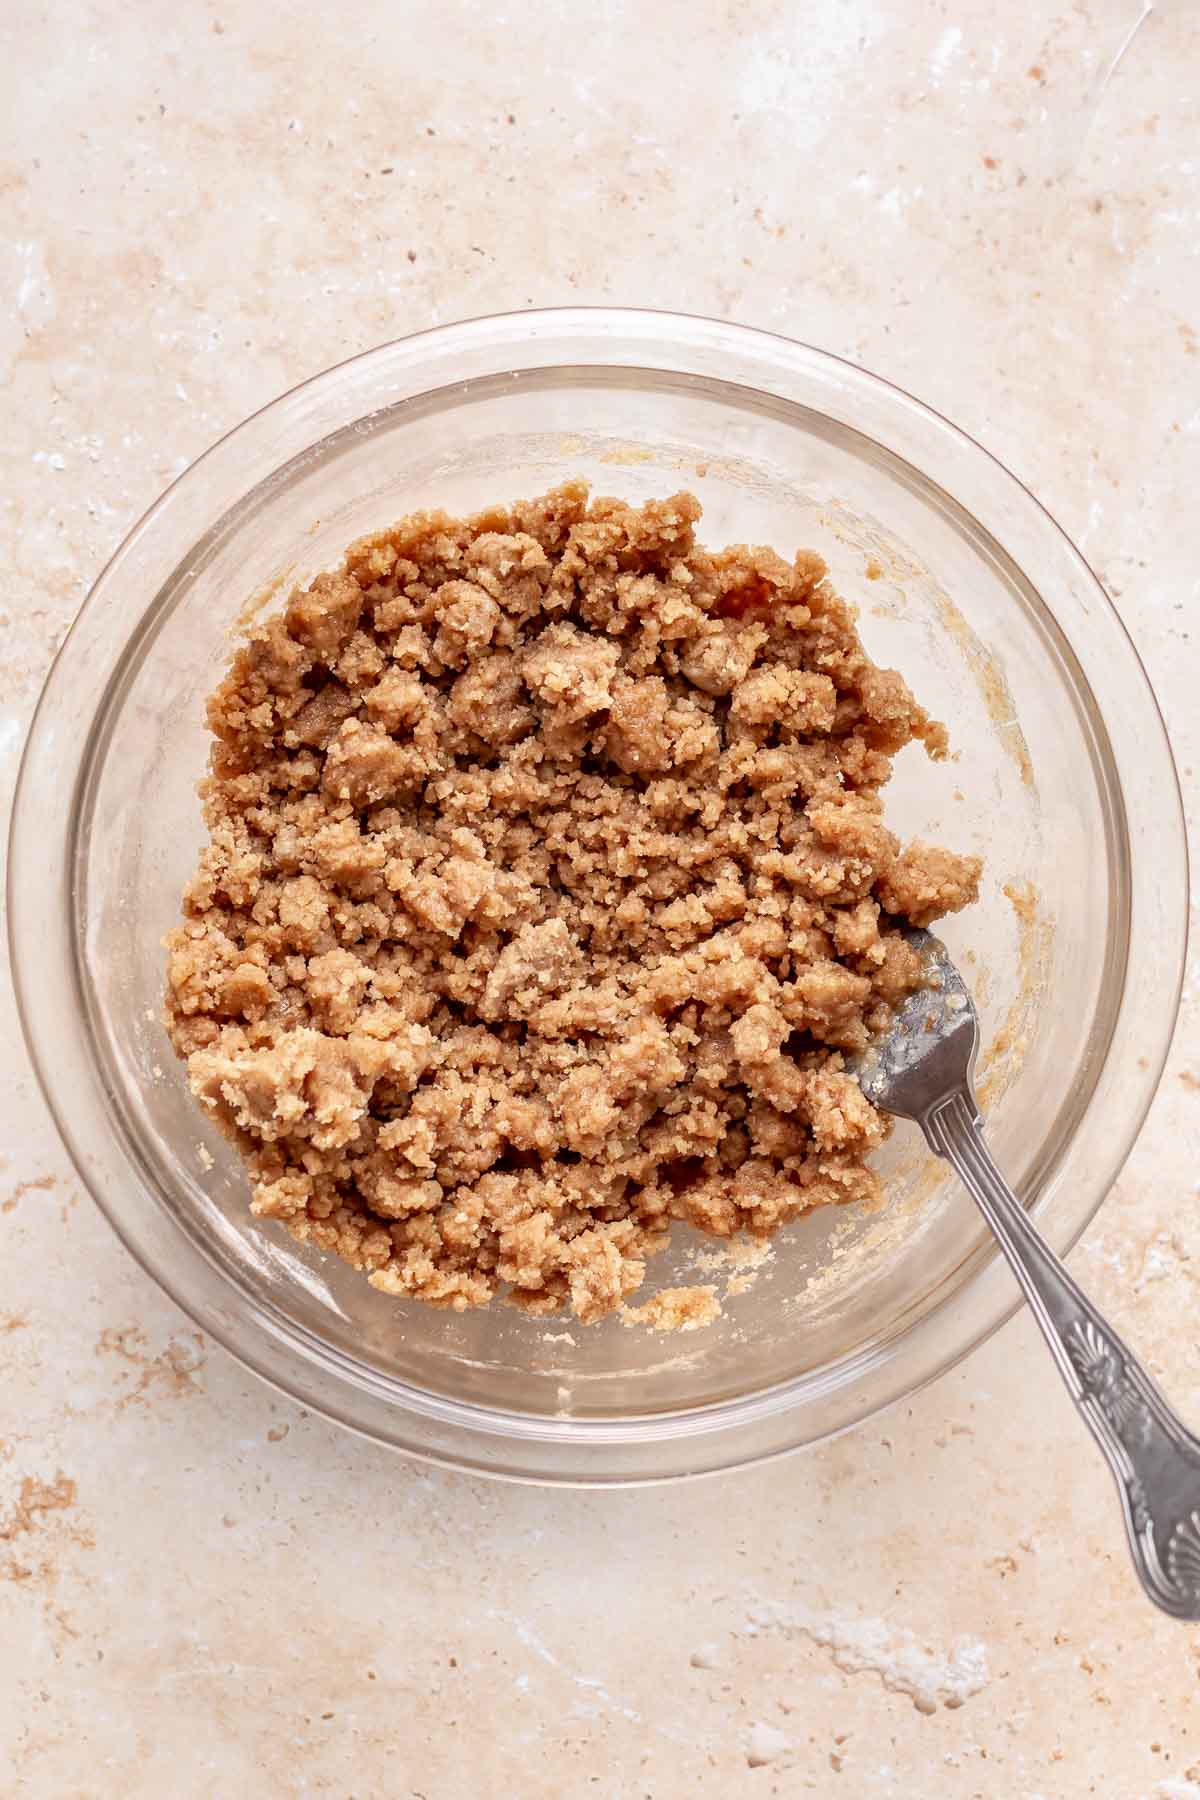 Streusel topping mixed in a bowl with a fork.